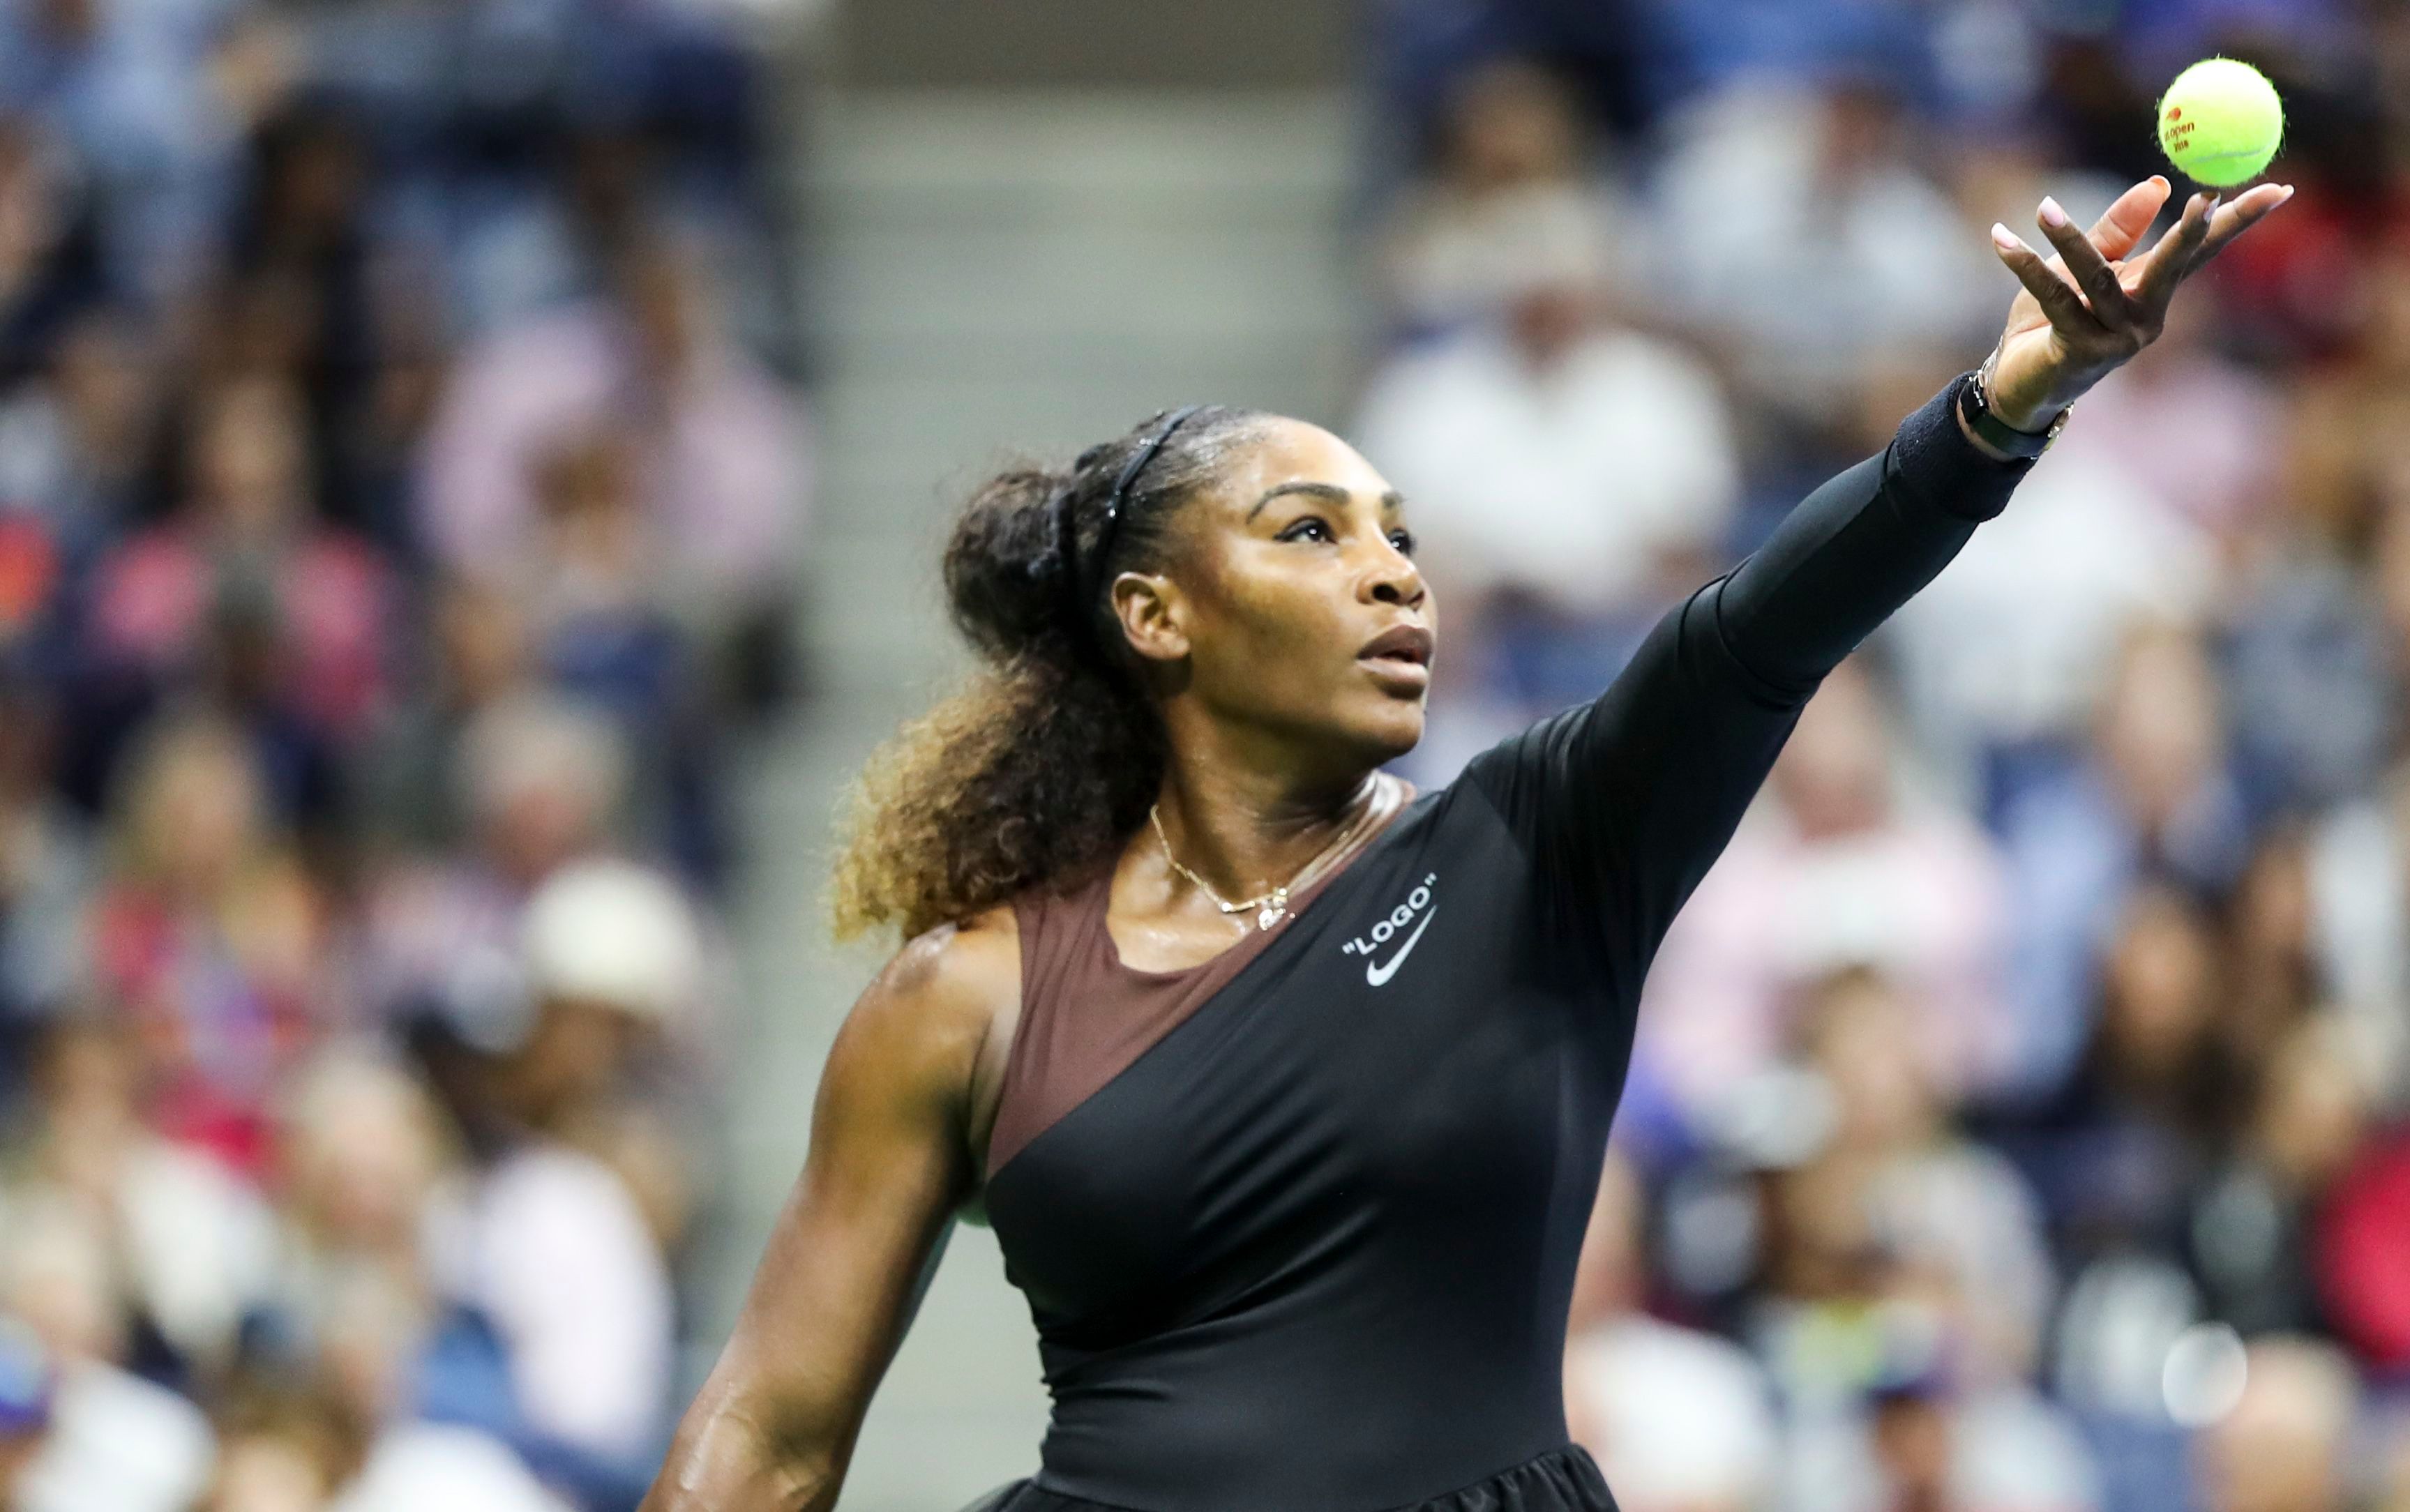 Serena Williams in action during the women's final
                      U.S. Open Tennis Championships at the USTA National Tennis Center in Flushing Meadows, New York, on Sept. 8, 2018. (Dave Shopland—BPI/REX/Shutterstock)